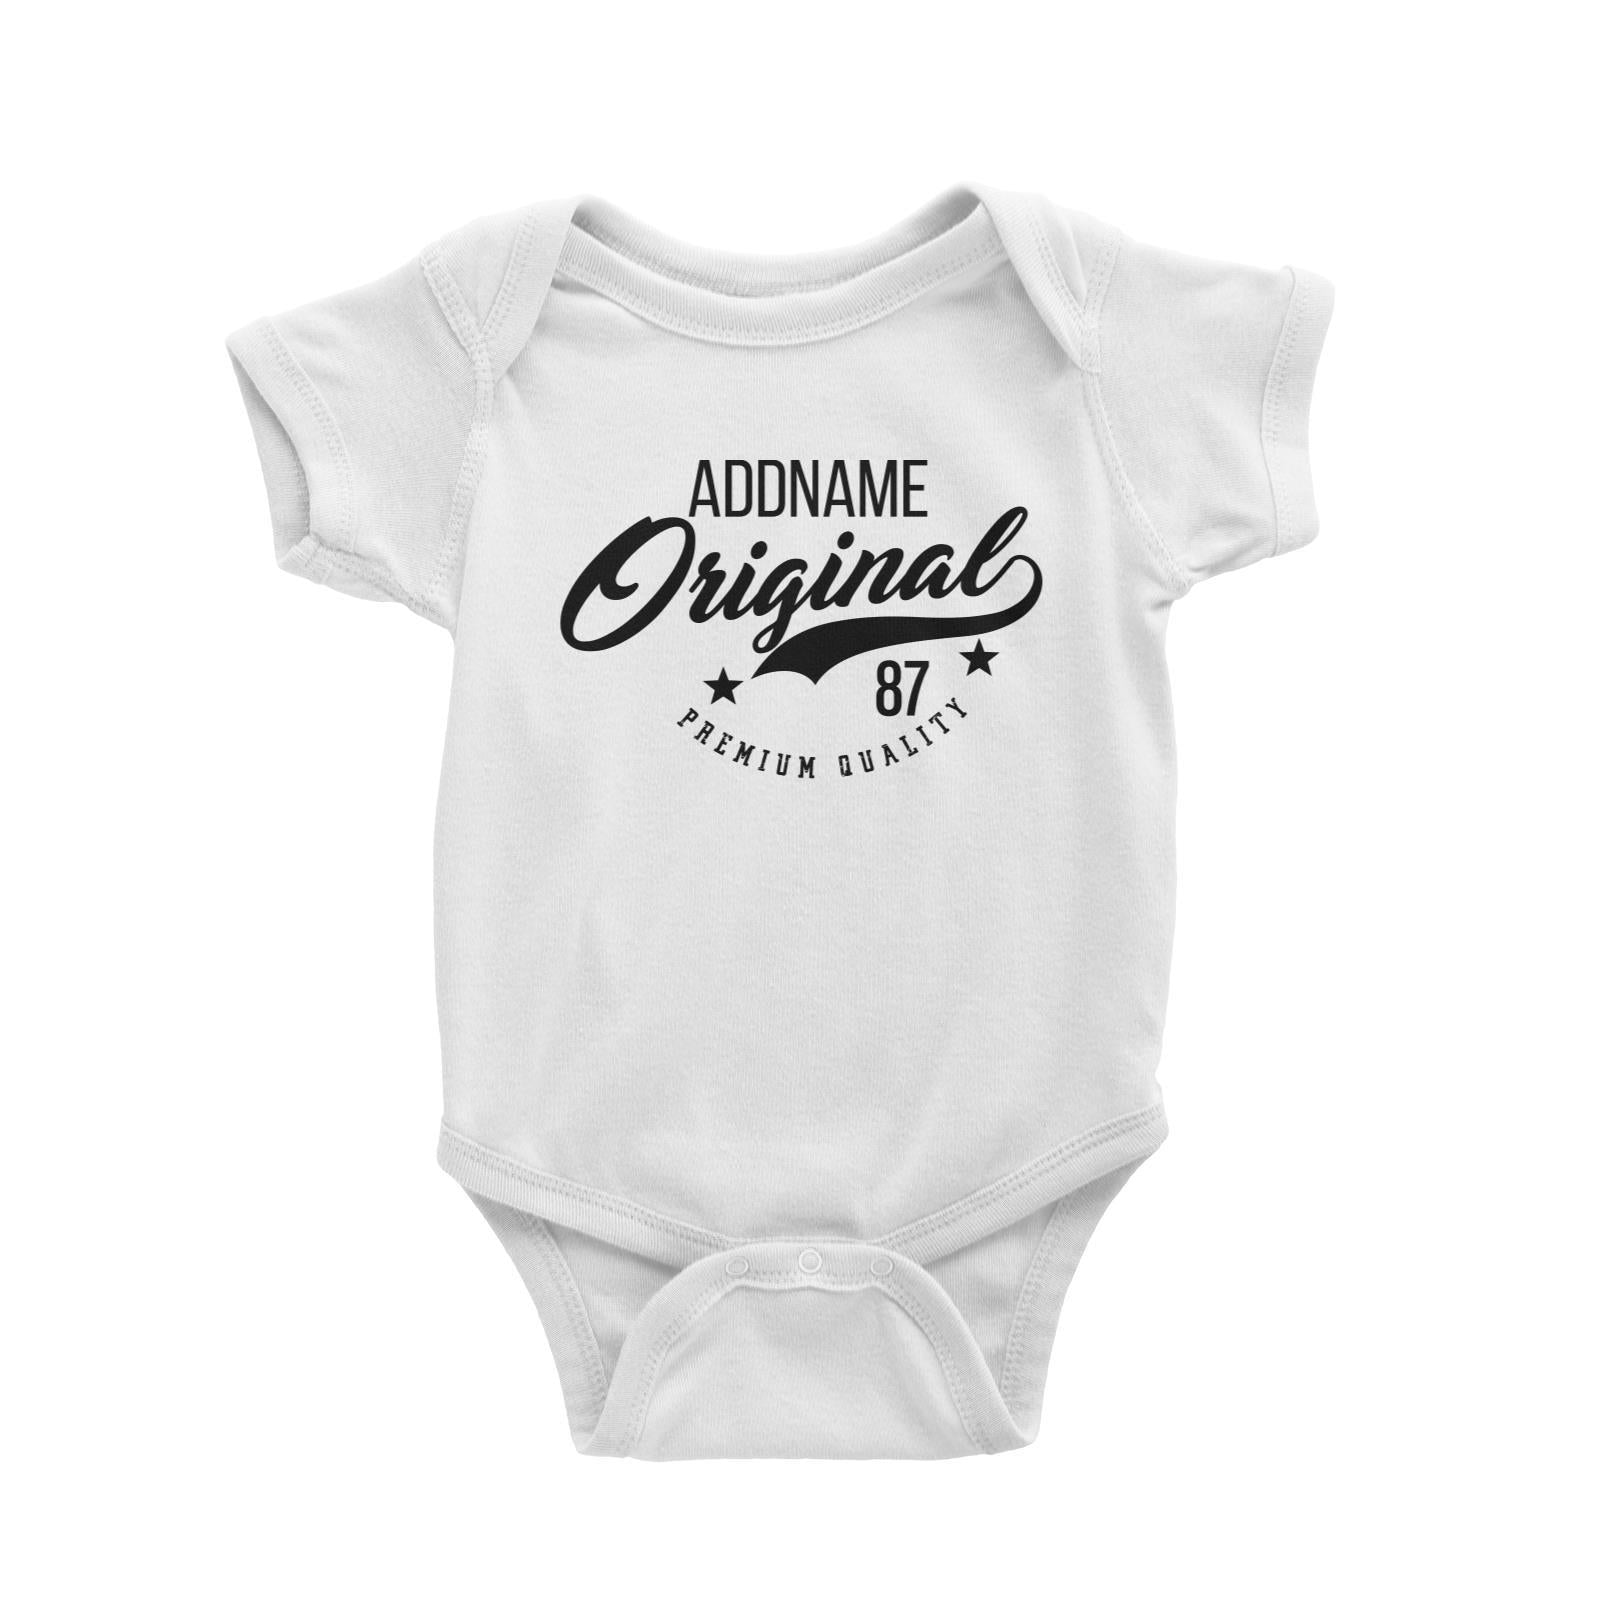 Original Premium Quality Personalizable with Name and Number Baby Romper